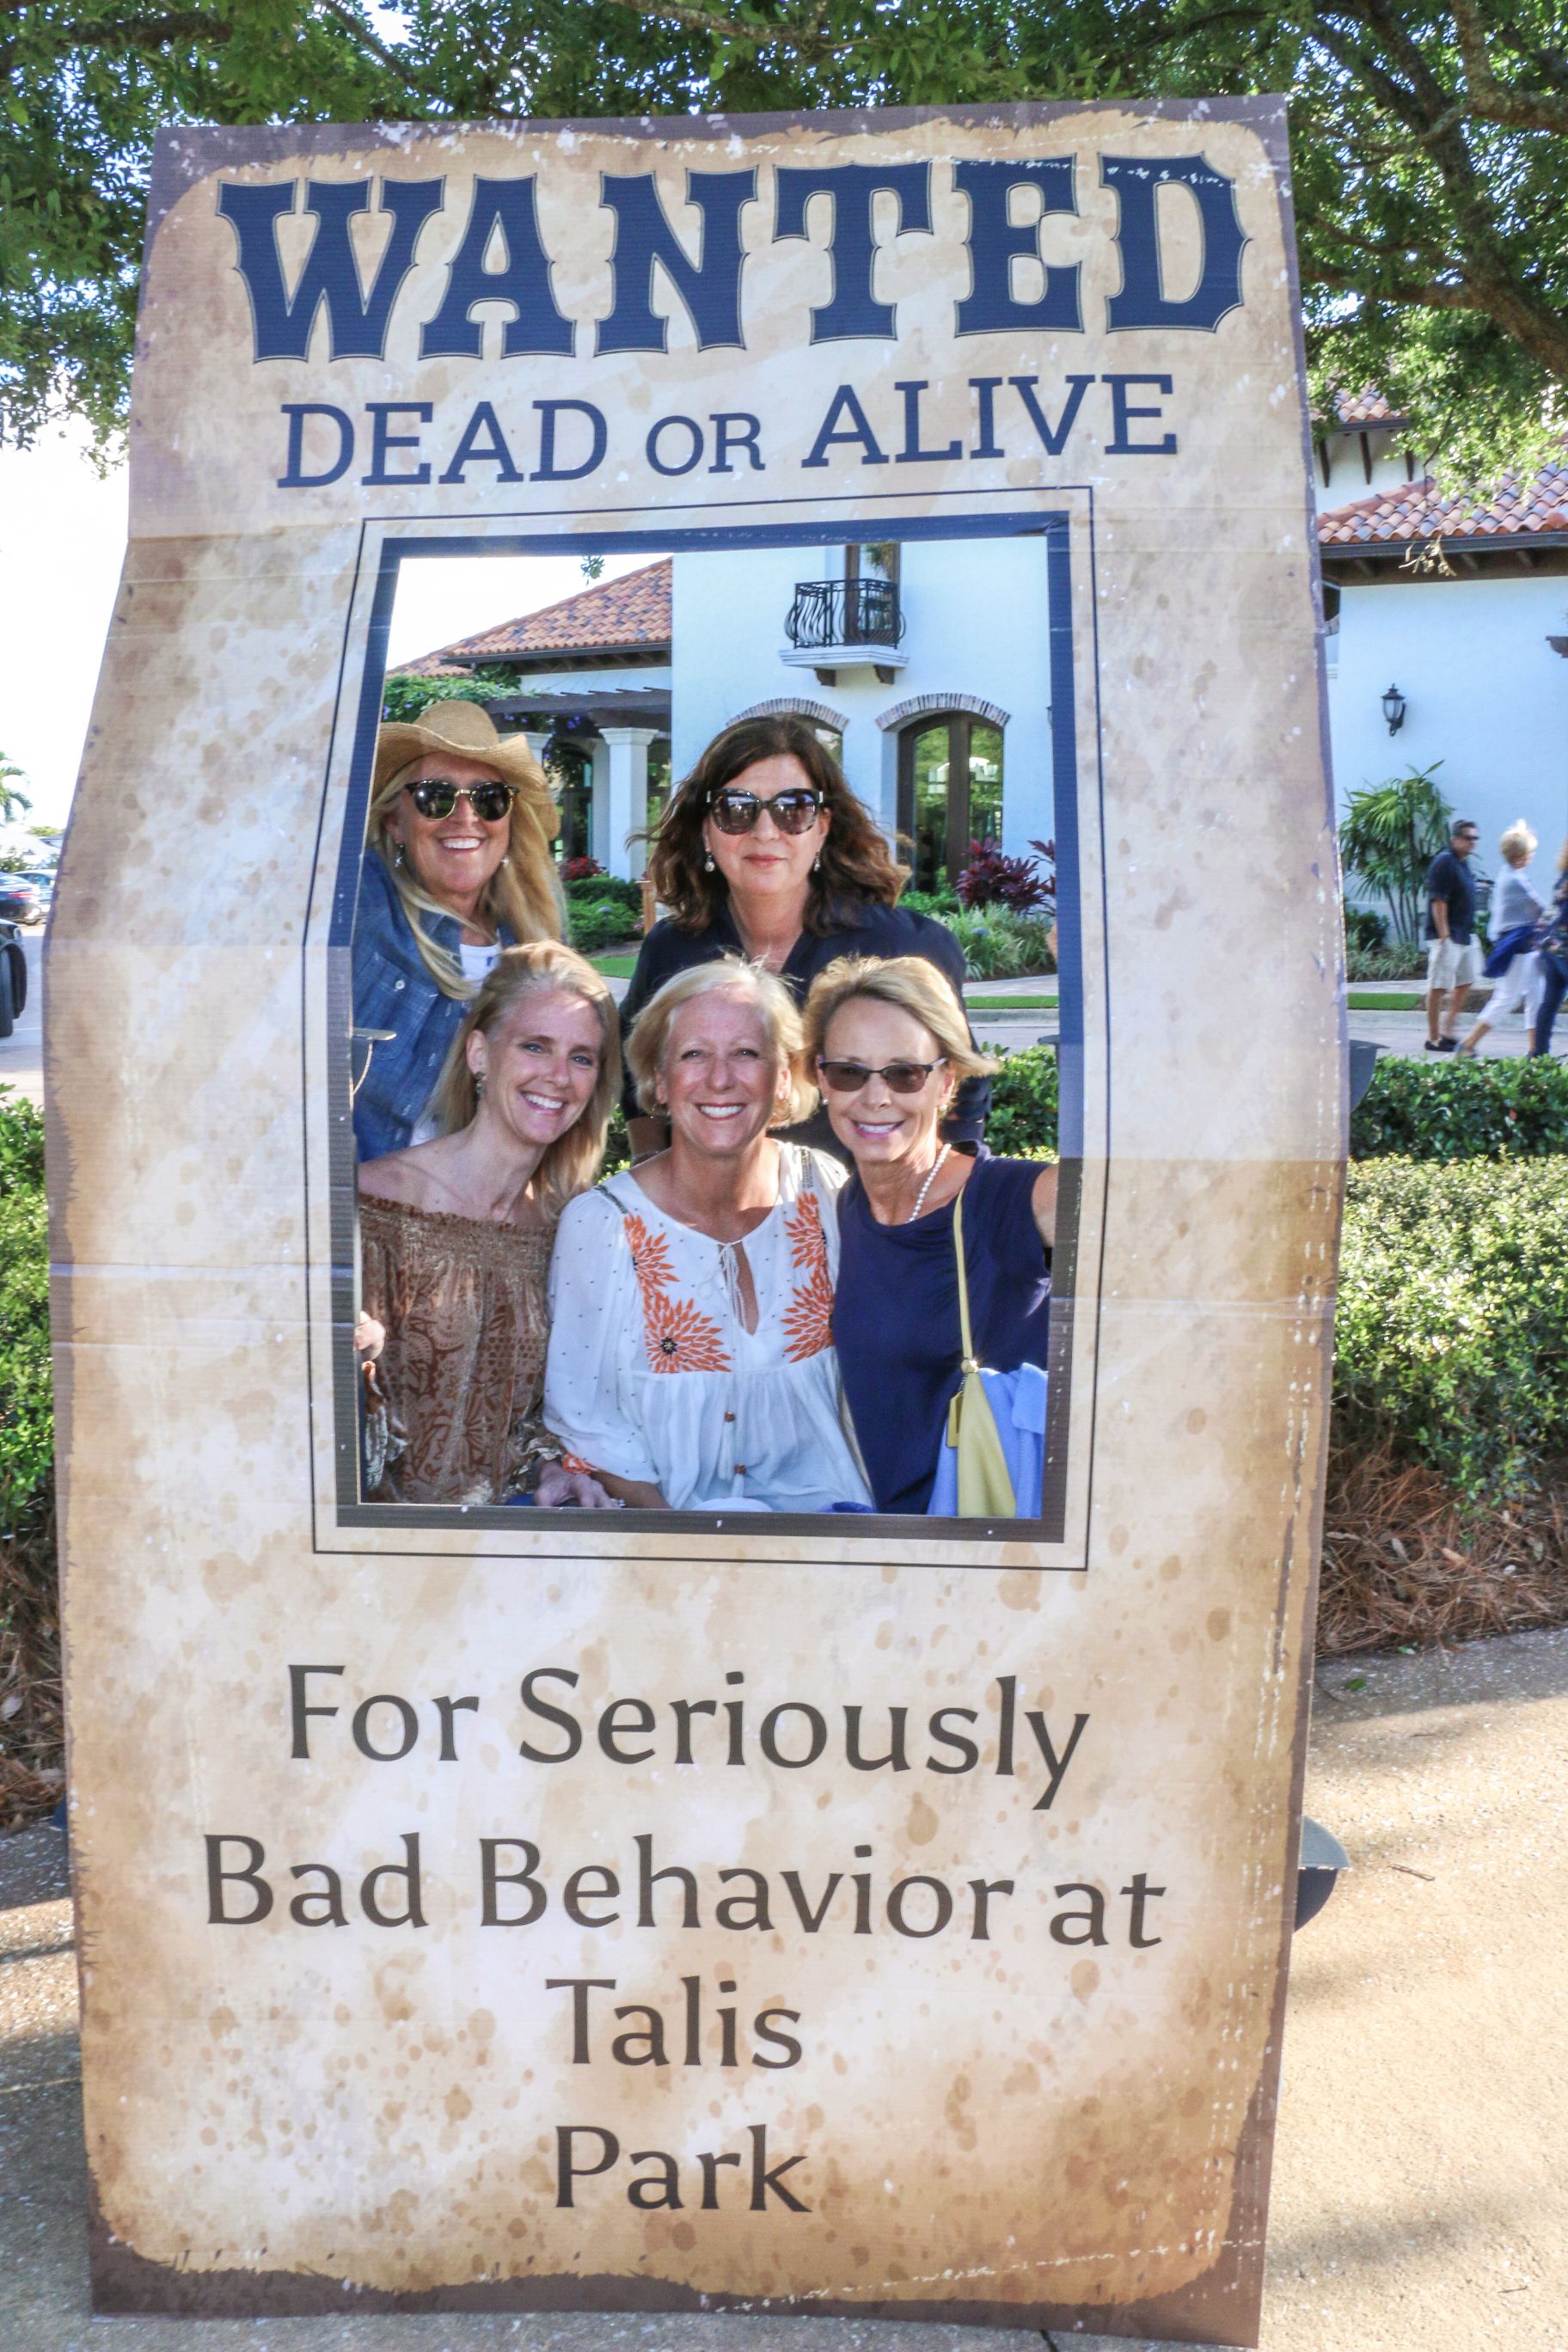 A group inside a standee reading: Wanted dead or alive for seriously bad behavior at Talis Park